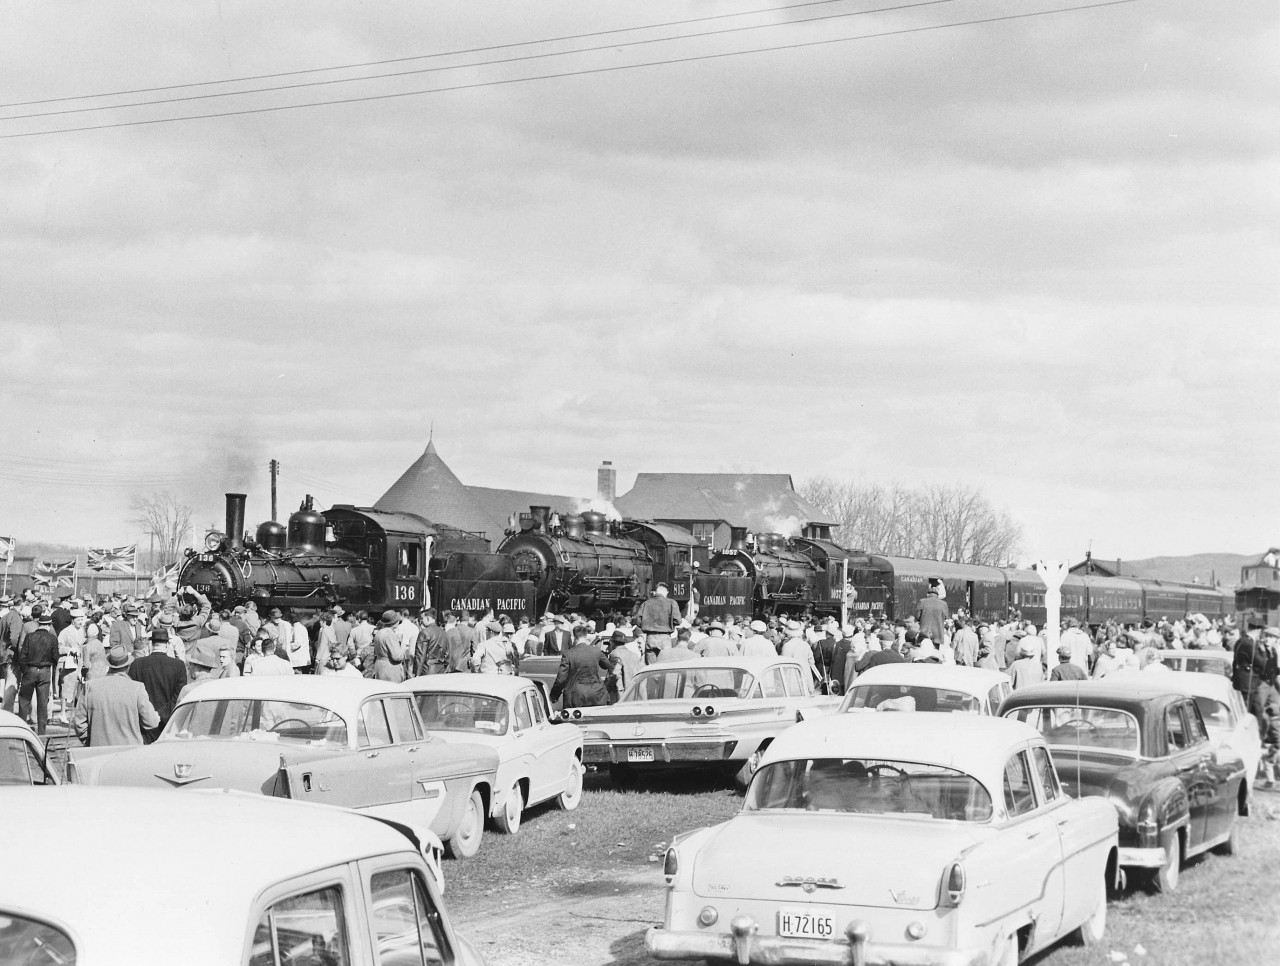 The tripleheader has arrived at Orangeville; quite late but still hundreds were waiting.  A sea of people. Check out those cars! Remember it is 1960. The Chief of Police said there were more people than when the soldiers came home from the War!  Seeing the crowd I immediately cancelled a planned runpast for fear of injuries.  A brass band greeted the passengers and after a brief ceremony the crew set about turning the train for the return trip.  The train was first split to spot the diner at the station (the train arrived one track over) to water it since the hose was not long enough to reach. This delayed remarshalling the train which required moving the baggage car to the other end and the two wooden SUF (Steel Under Frame) coaches to the rear since they could not be marshaled ahead of steel cars.  The CPR had wanted to run the engines and baggage car to turn on the wye at Fraxa (and charge more to do so!).  They said the turntable was out of order. I didn’t believe that so, I went to Orangeville to prove it was still serviceable.  I refused because I did not want to leave people with nothing to look at while this was being done.  I won. My train! The engines were turned, coaled and watered one at a time giving the onlookers a free show.    
Raymond L. Kennedy